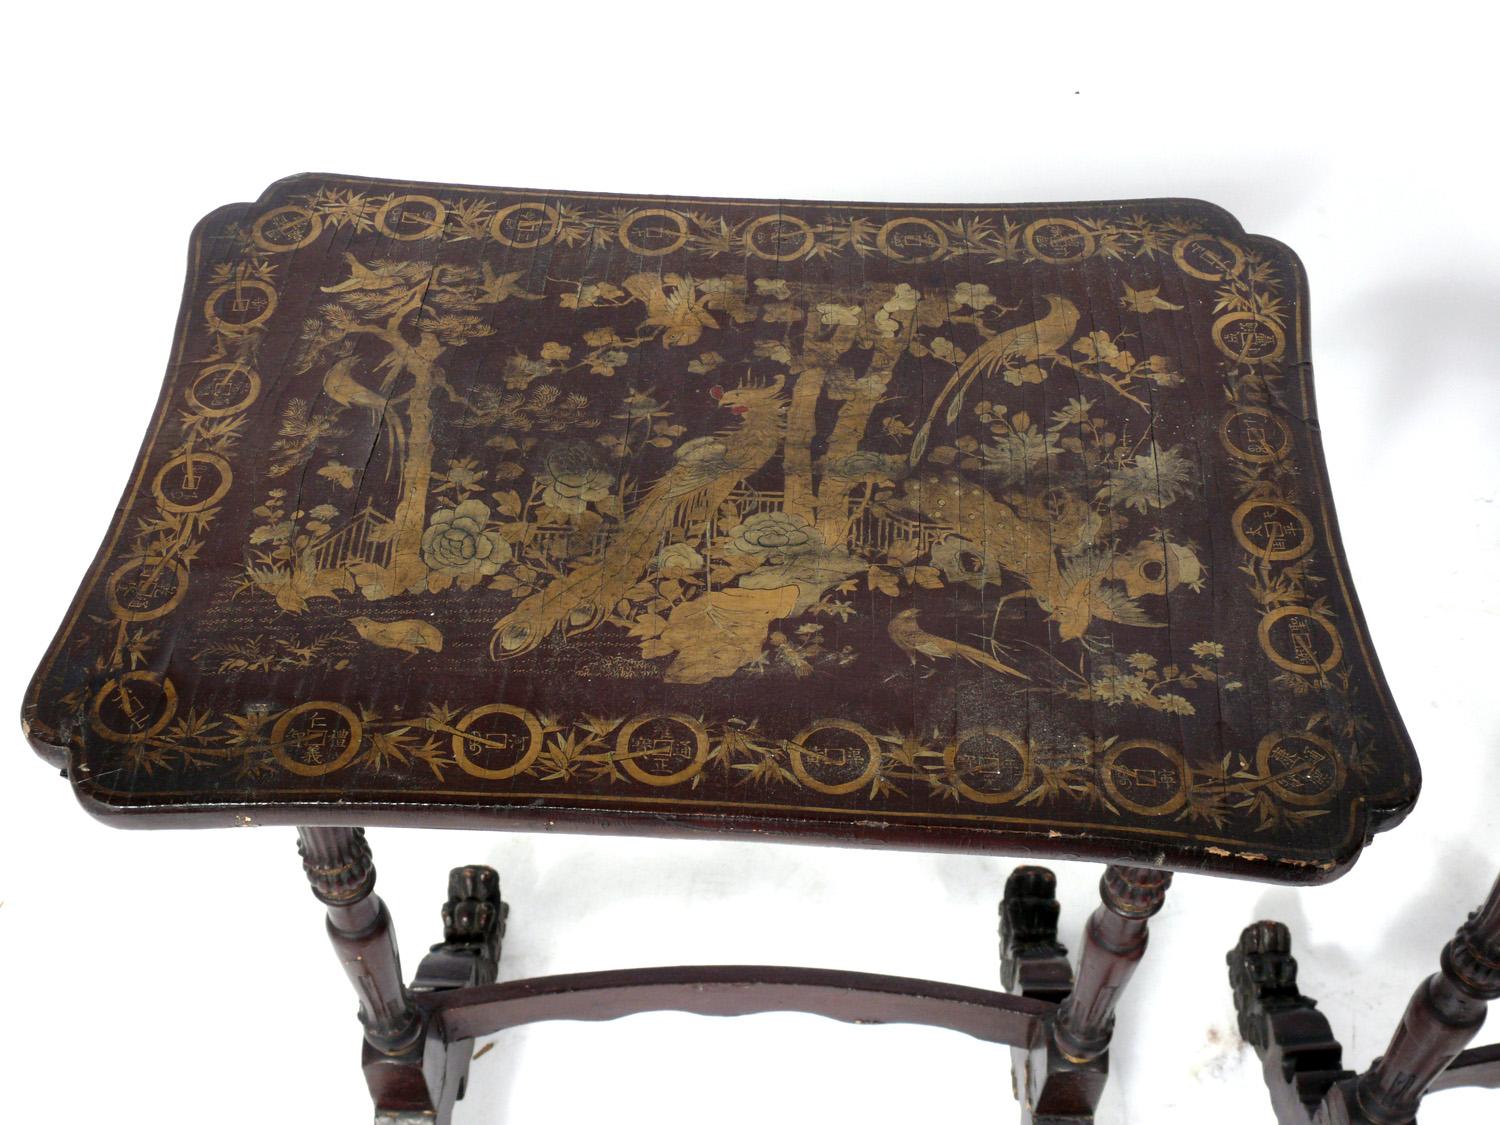 19th century Chinoiserie nesting tables, probably Chinese for the export market, circa 19th century. They retain their original overall craquelure patina.